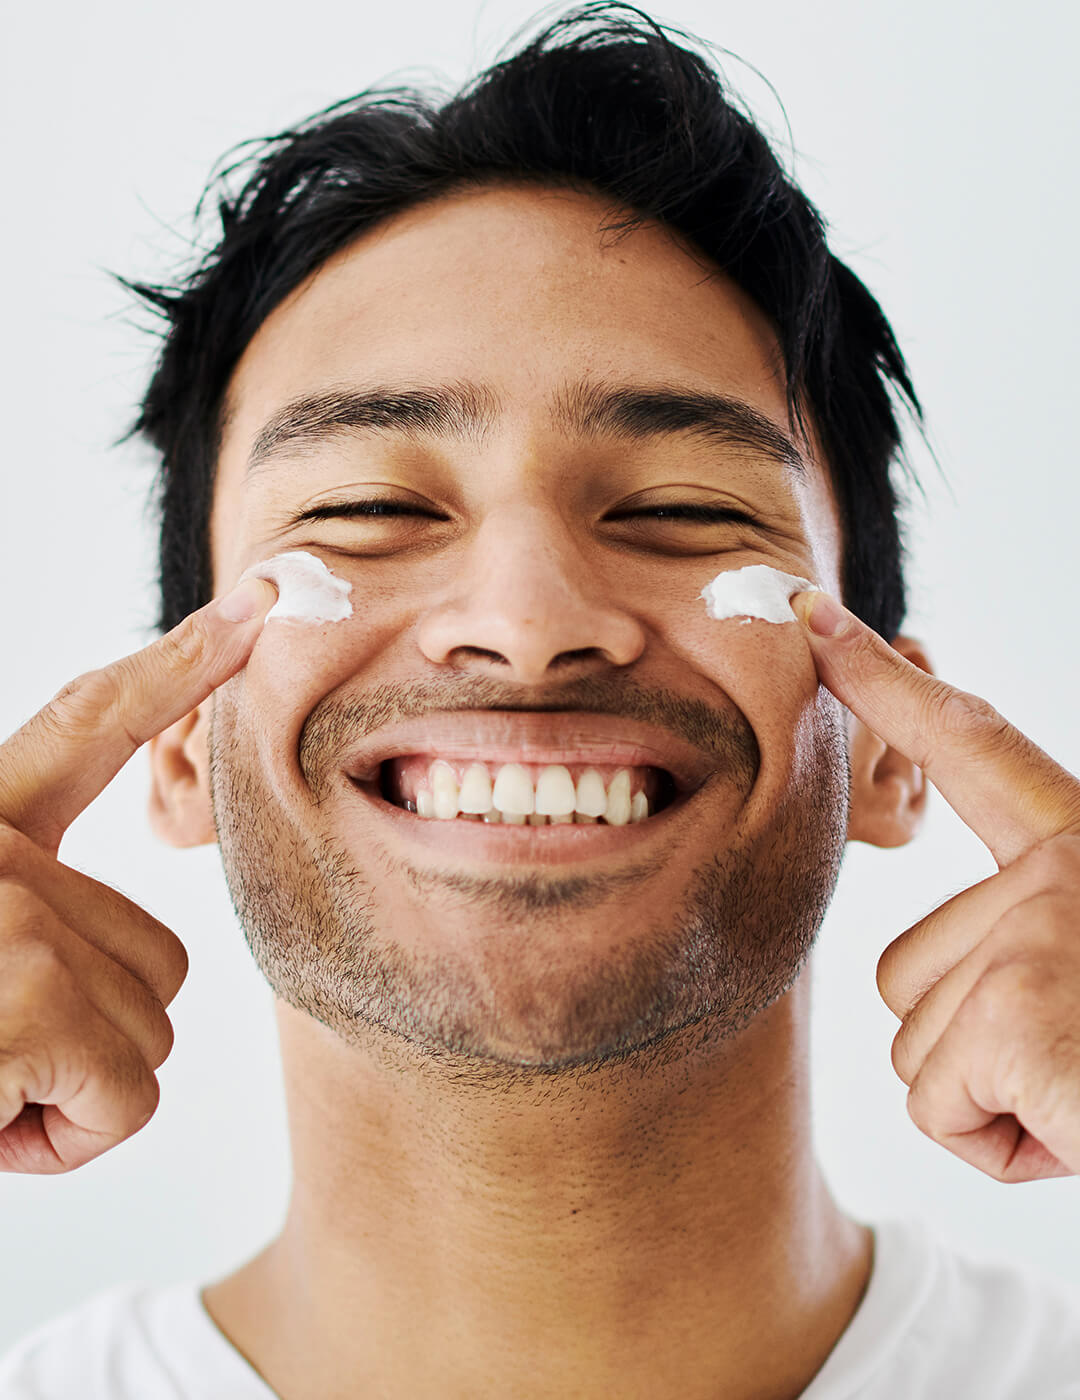 Man grooming, applying face cream or lotion, enjoying self care against grey background with copy space. Guy smiling while doing treatment and skincare. Male trying an anti aging or hydrating facial